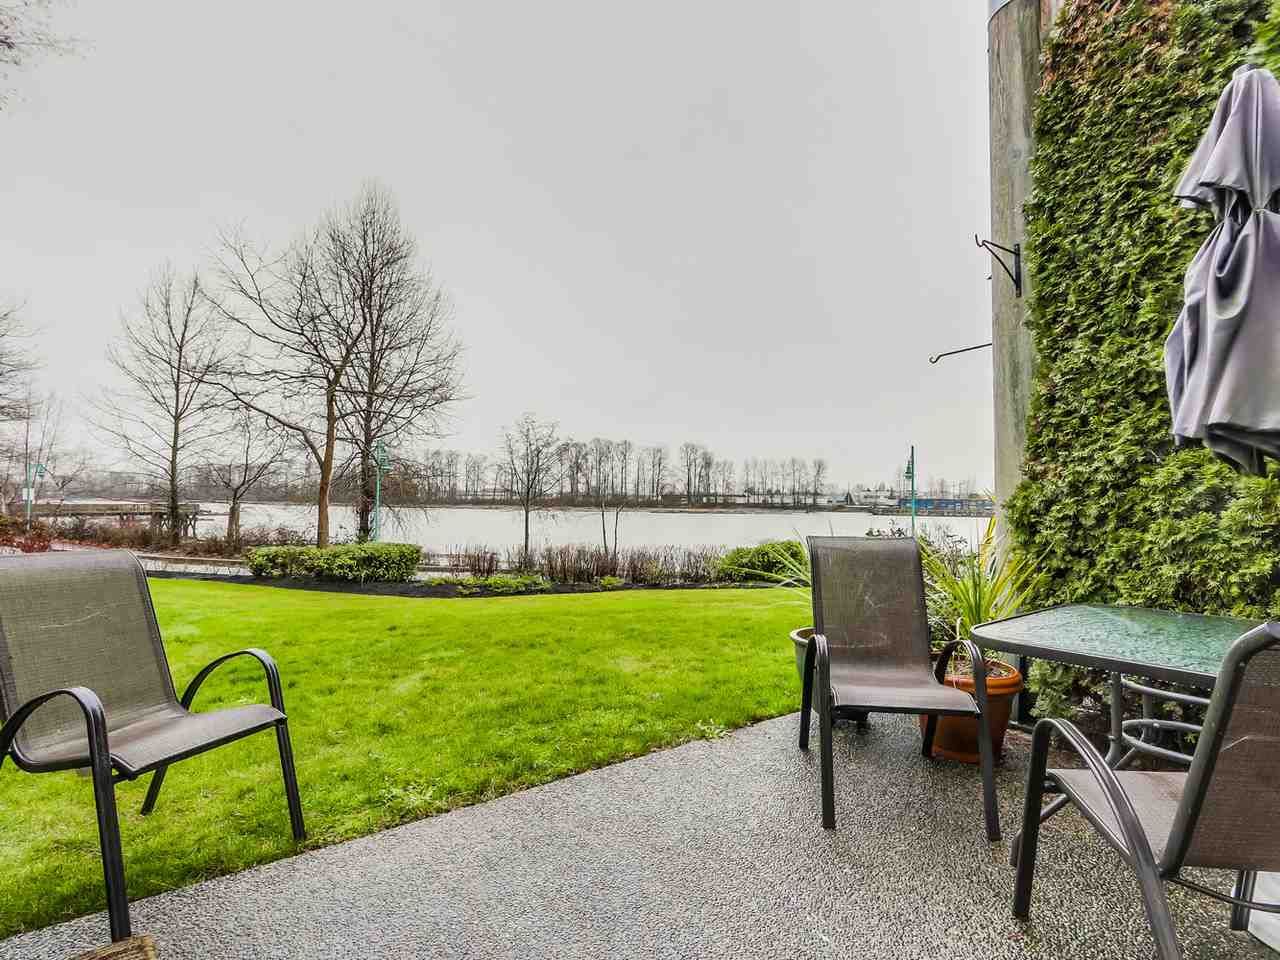 Main Photo: 3 2138 E KENT AVENUE SOUTH in Vancouver: Fraserview VE Townhouse for sale (Vancouver East)  : MLS®# R2031145